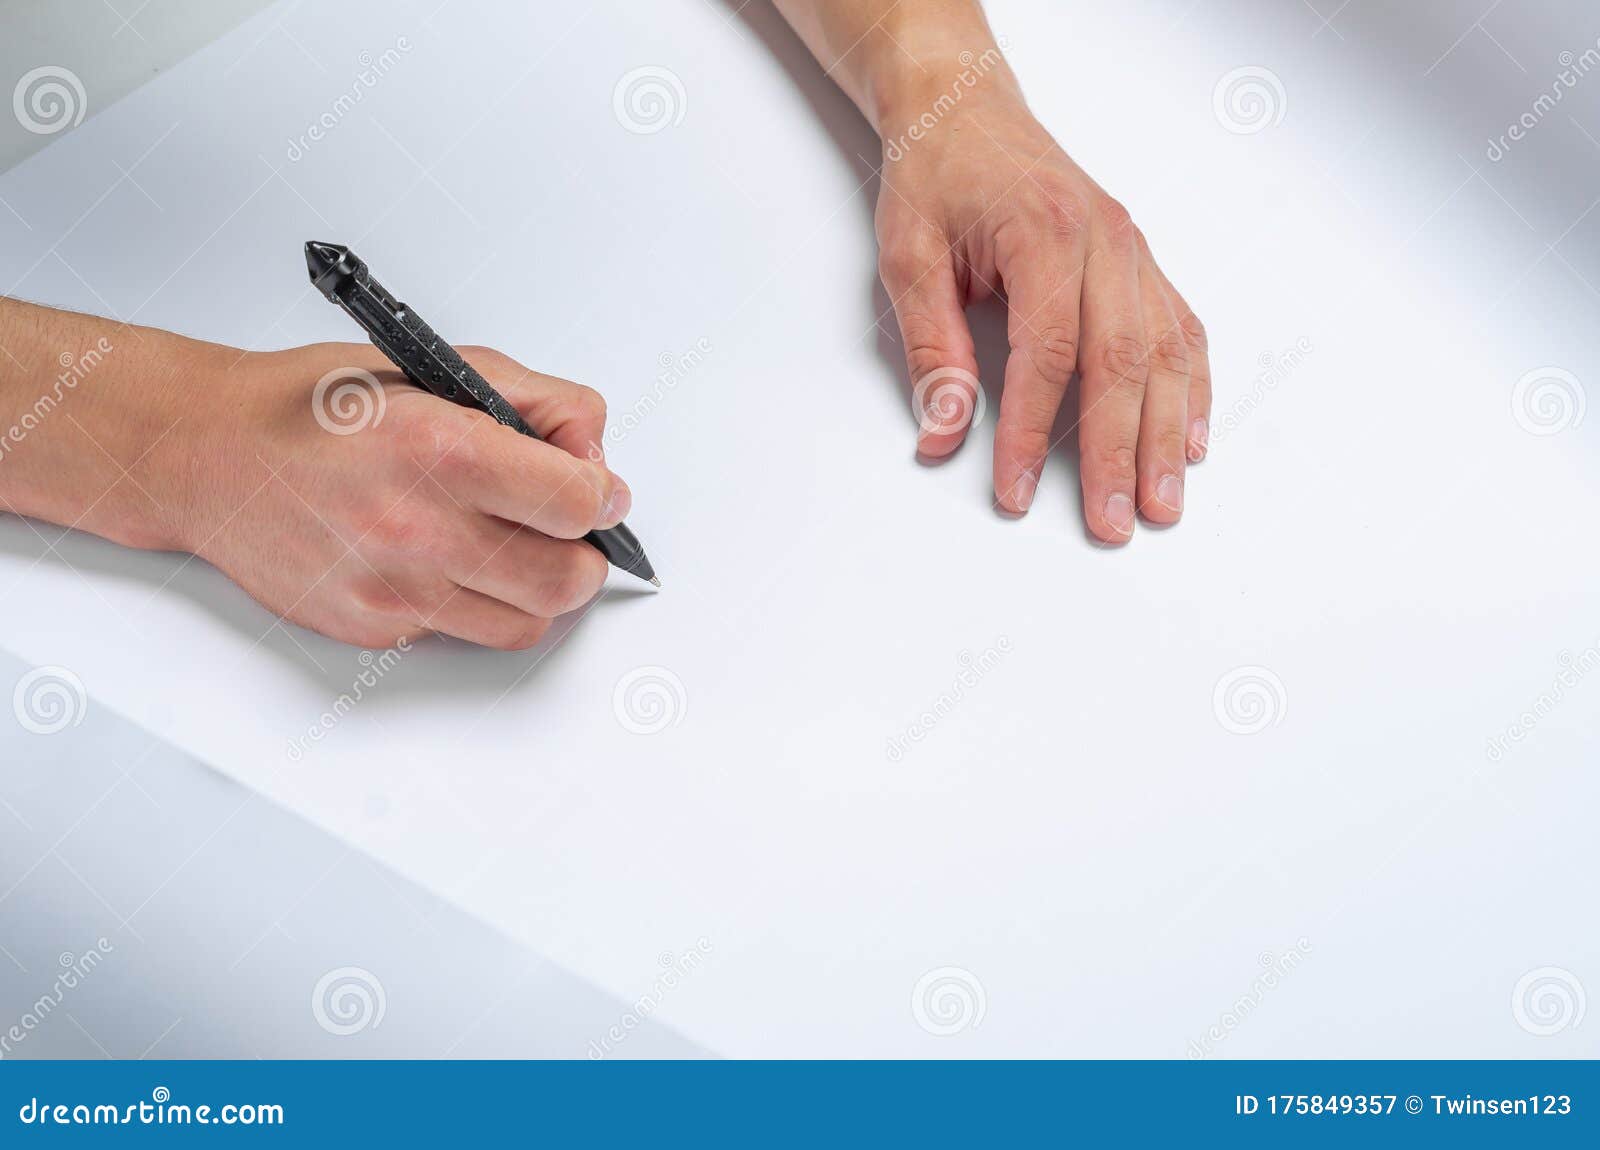 Male Hand Writes a Black Pen on White Paper Stock Image - Image of male ...